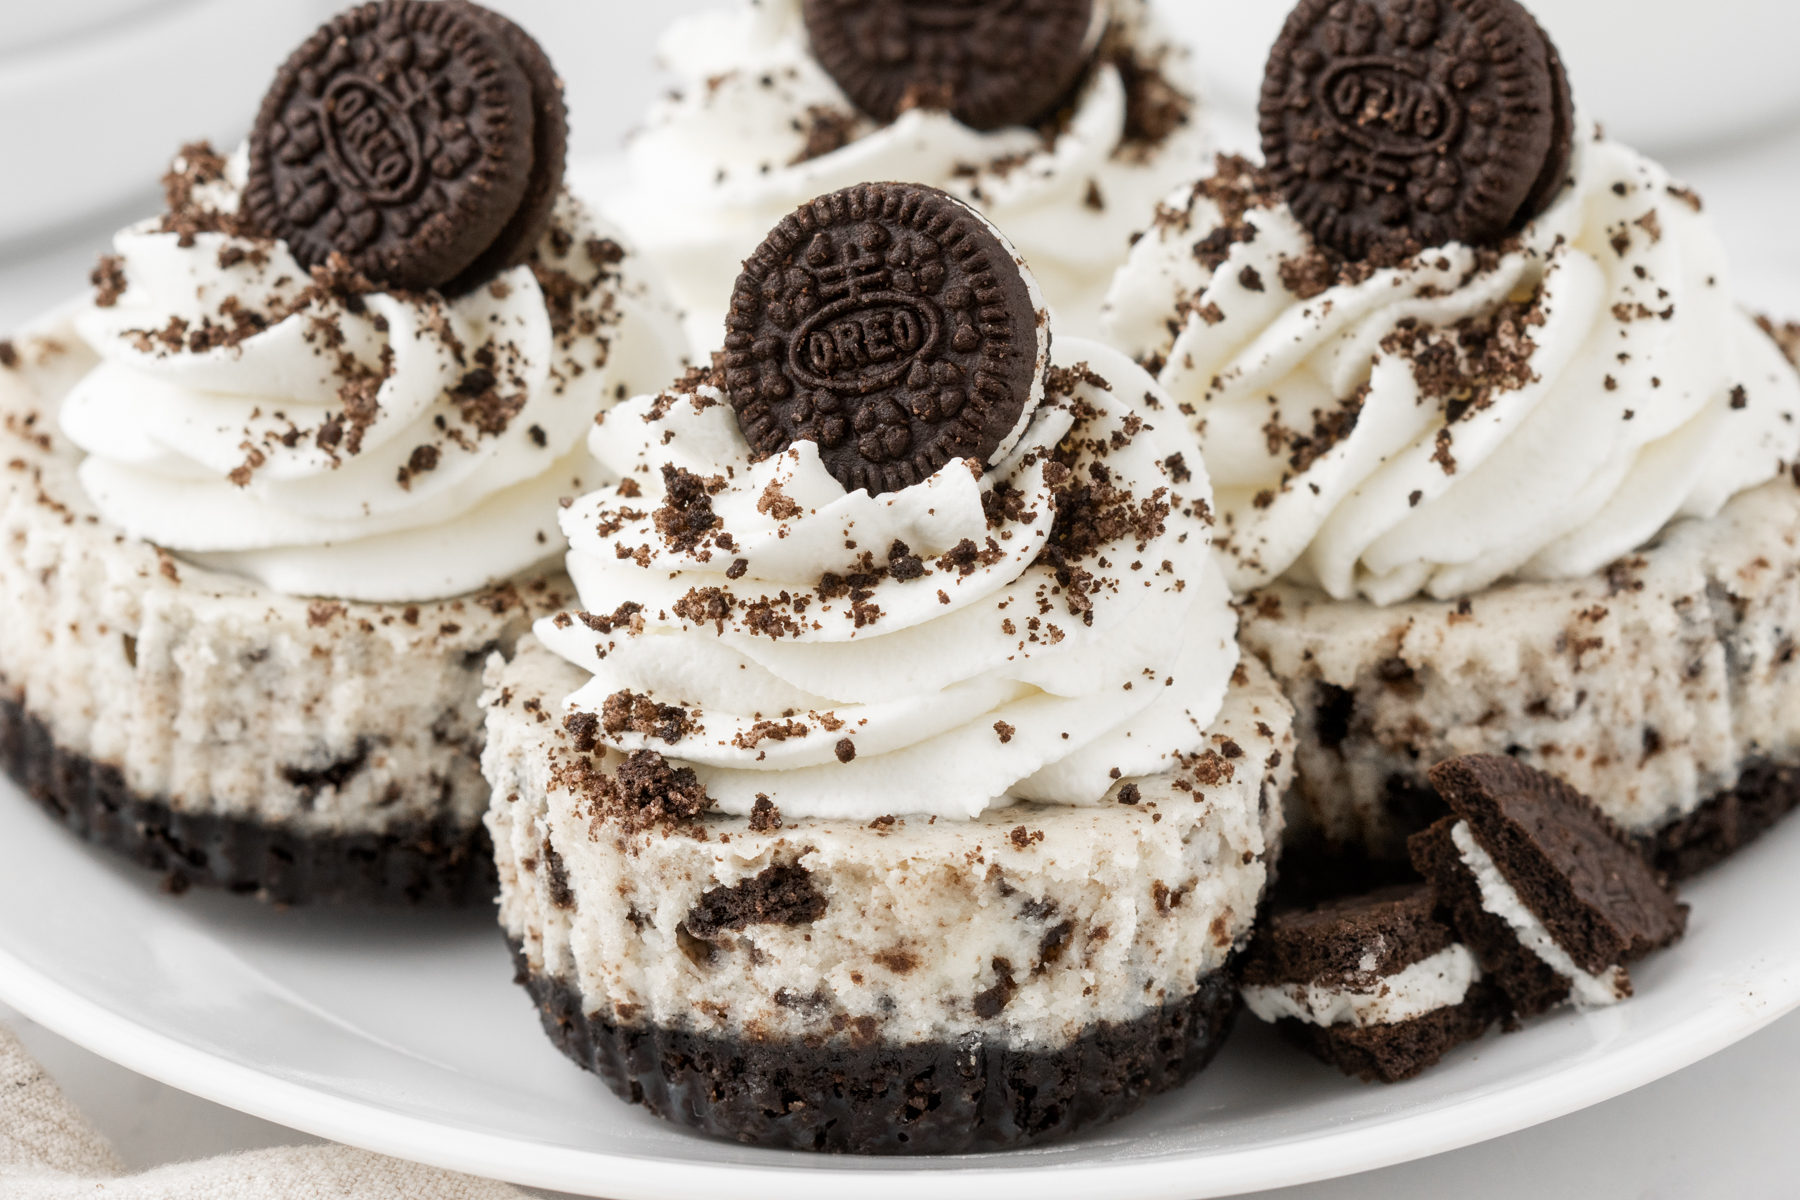 4 Oreo cheesecakes on a plate, topped with whipped cream, Oreo crumbs, and mini Oreos